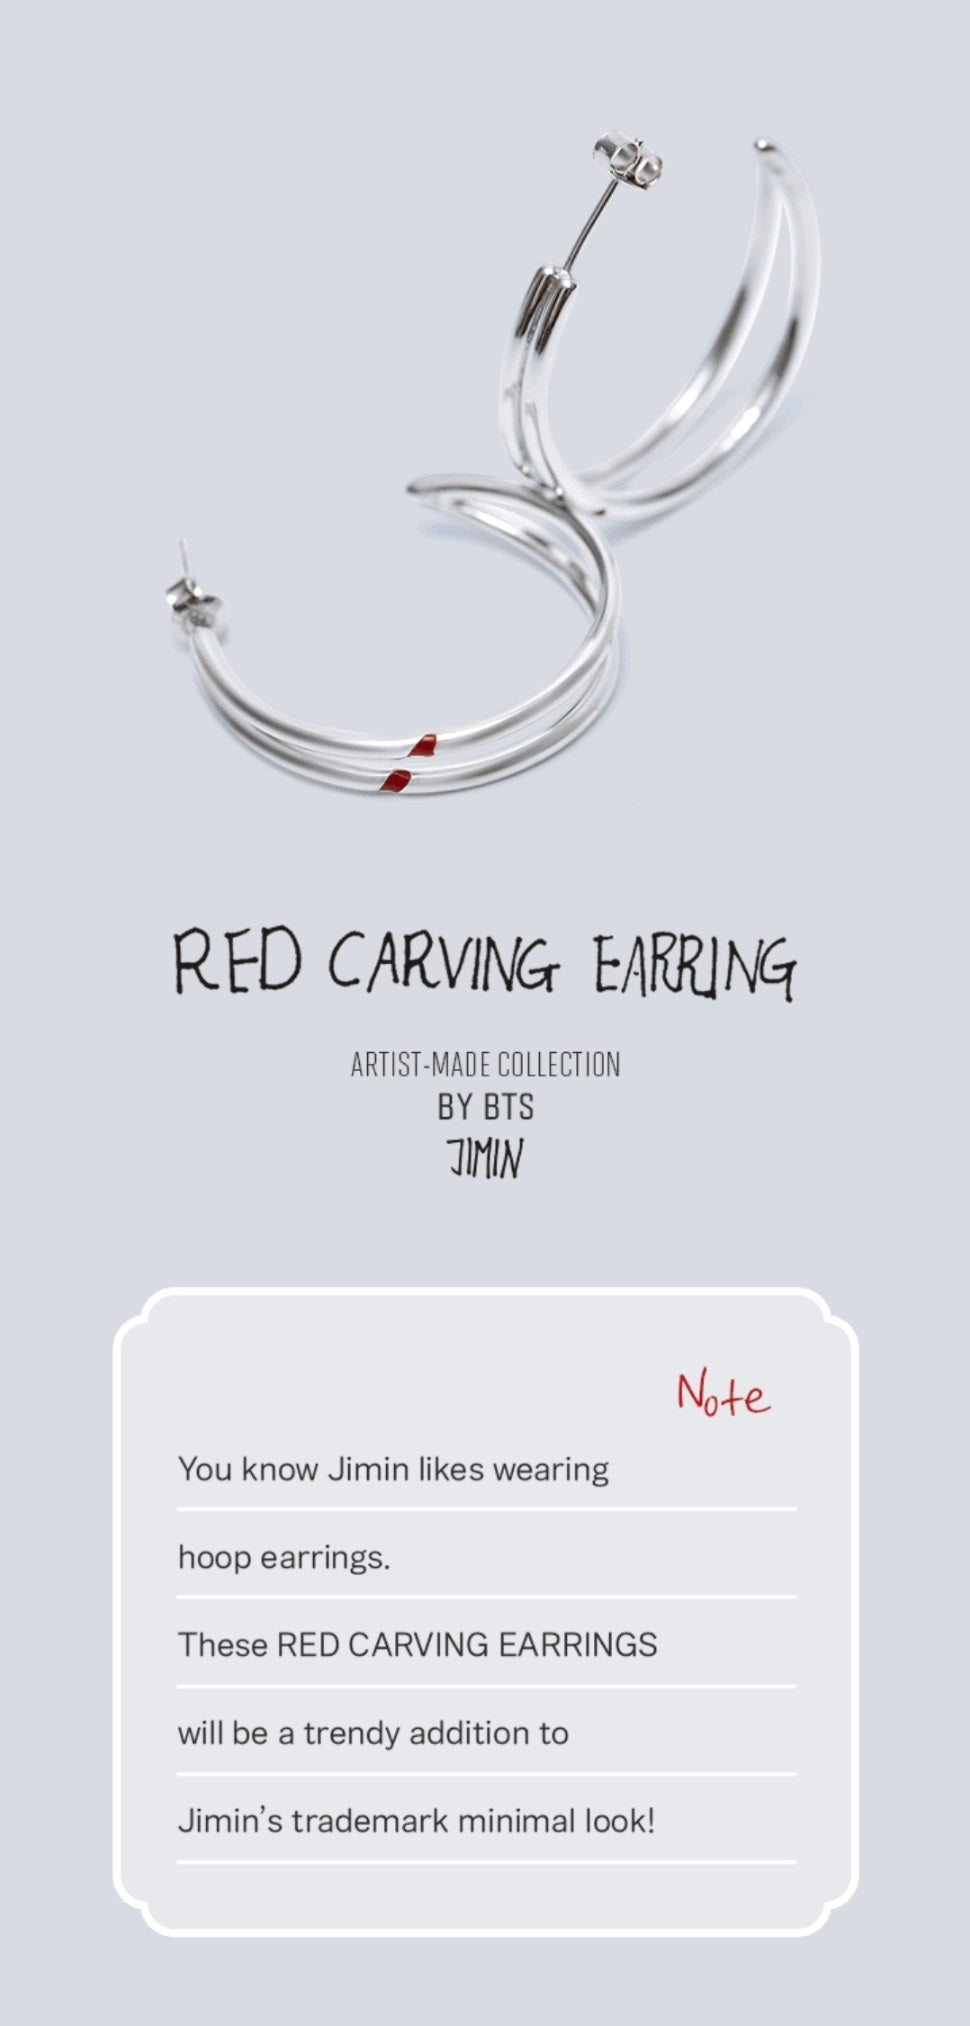 4TH PRE-ORDER] ARTIST-MADE COLLECTION BY BTS JIMIN - COKODIVE